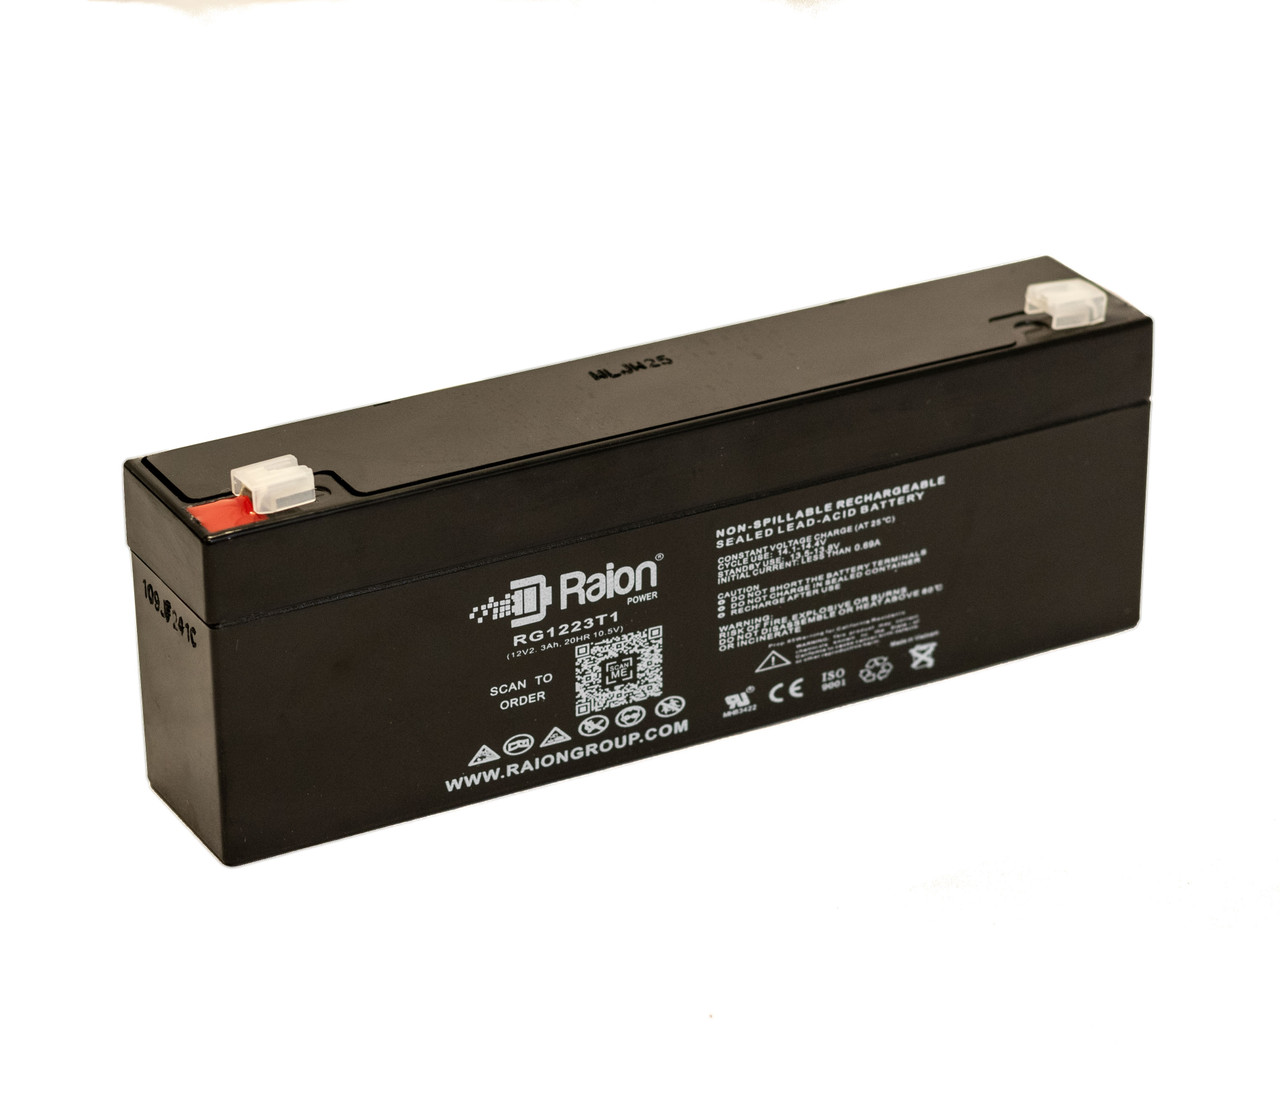 Raion Power RG1223T1 Replacement Battery for Siemens 300